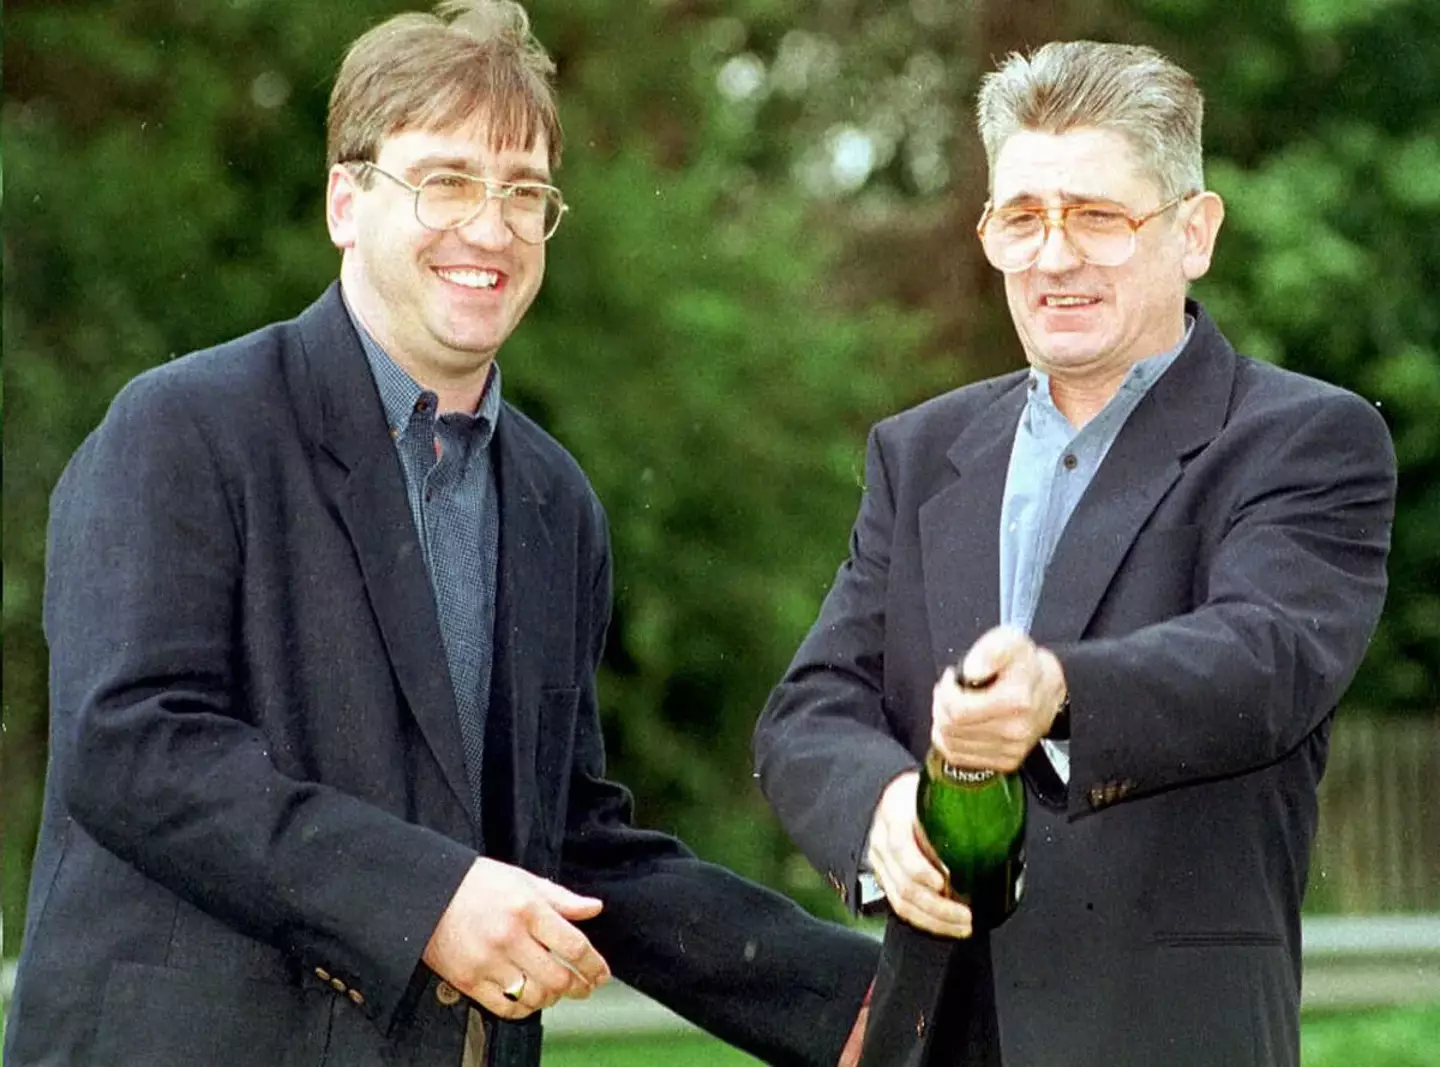 Mark Gardiner (left) and Paul Maddison (right) won £22.5 million on a Lotto ticket in 1995. (PA)